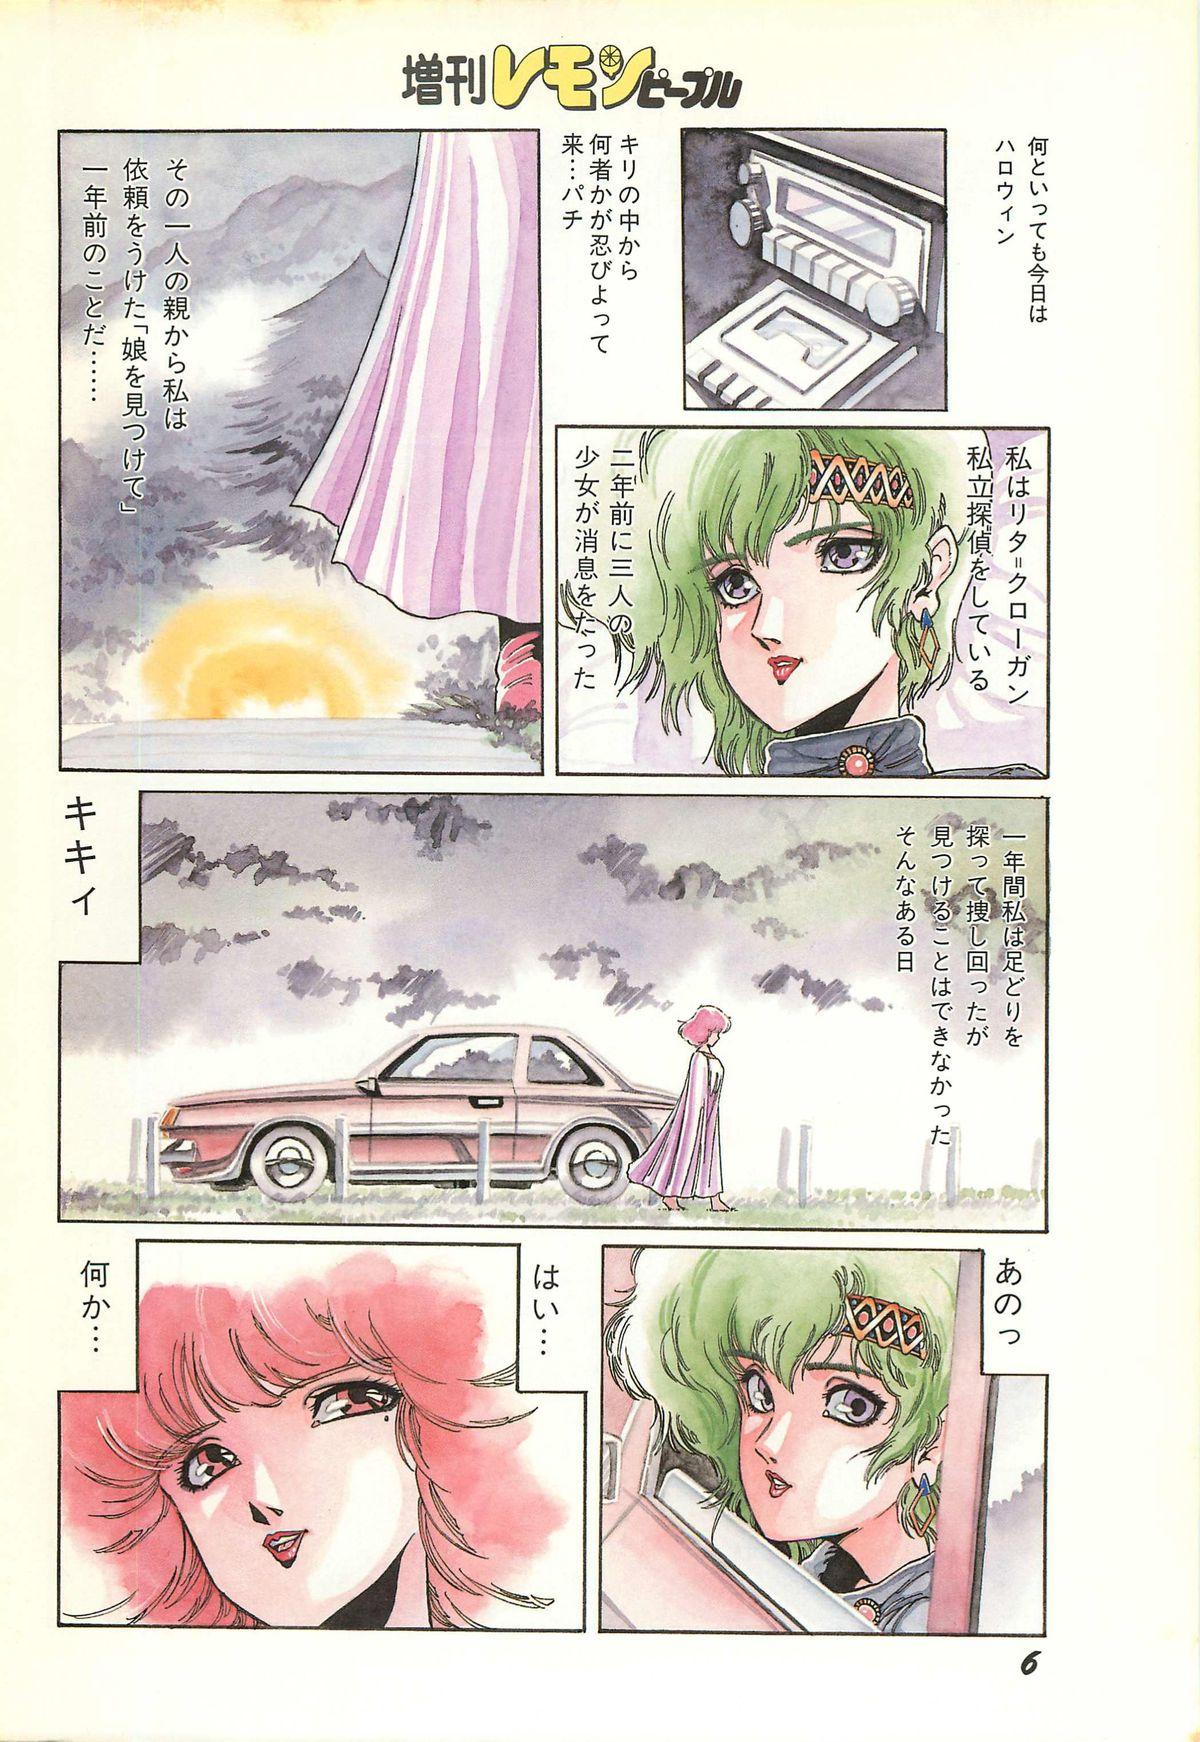 Youporn Lemon People 1986-11 Zoukangou Vol. 65 All Color Onlyfans - Page 8